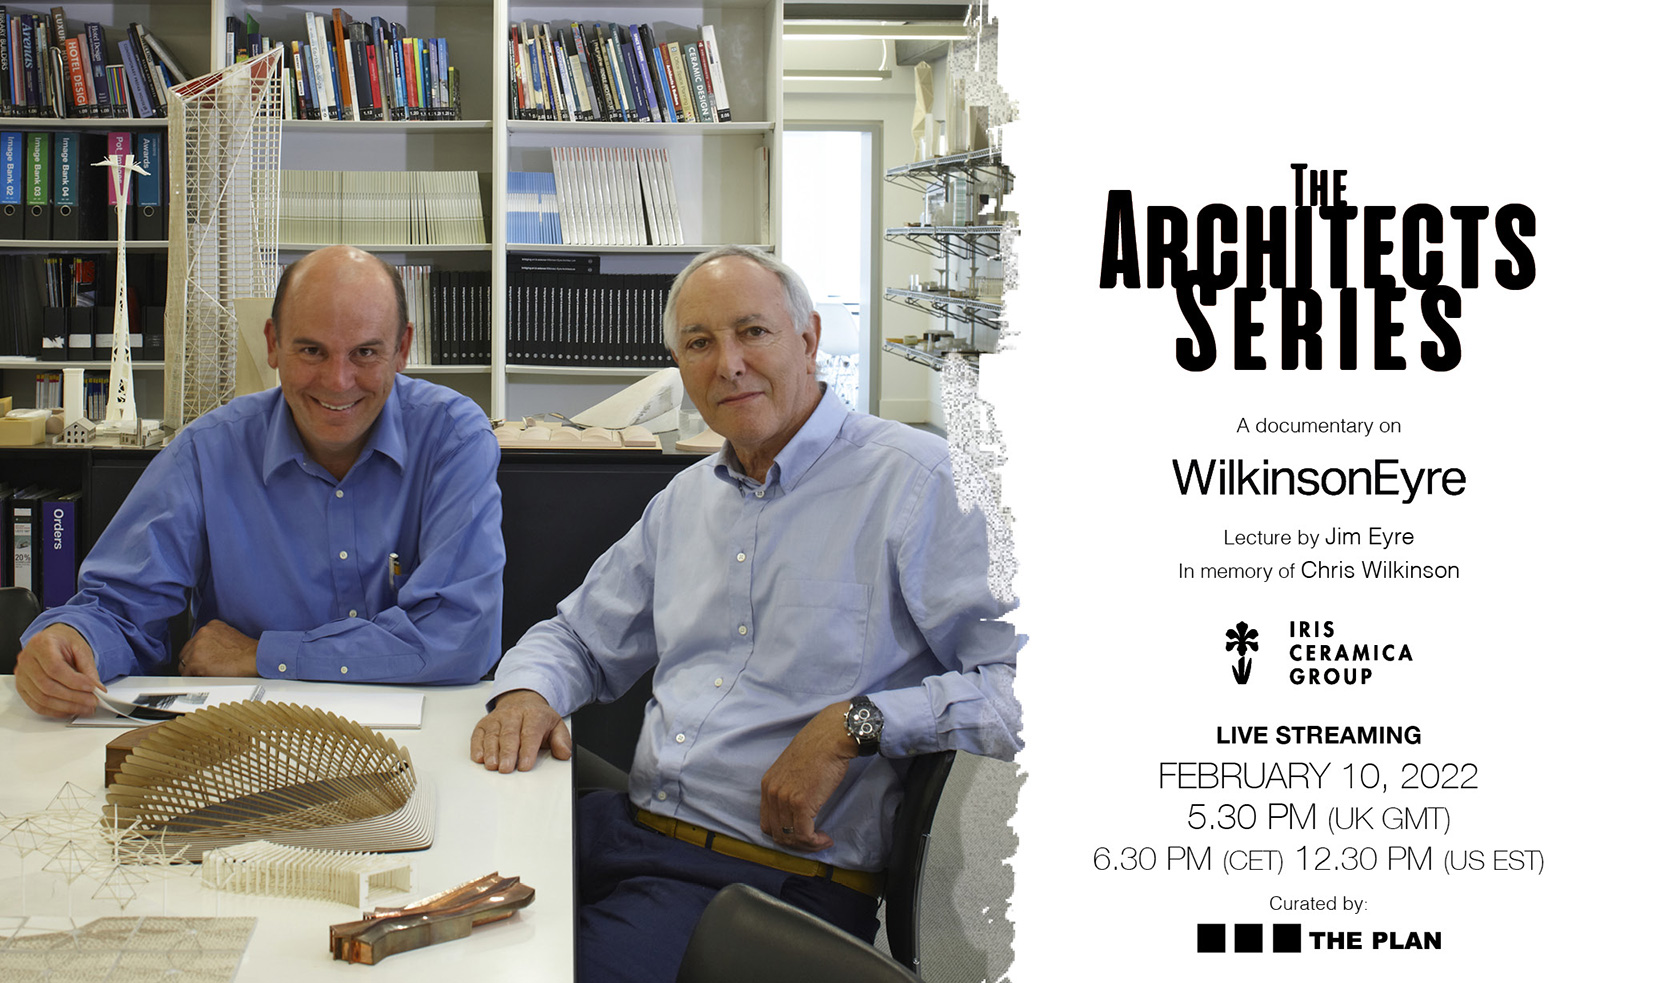 THE ARCHITECTS SERIES - A DOCUMENTARY ON: WILKINSONEYRE